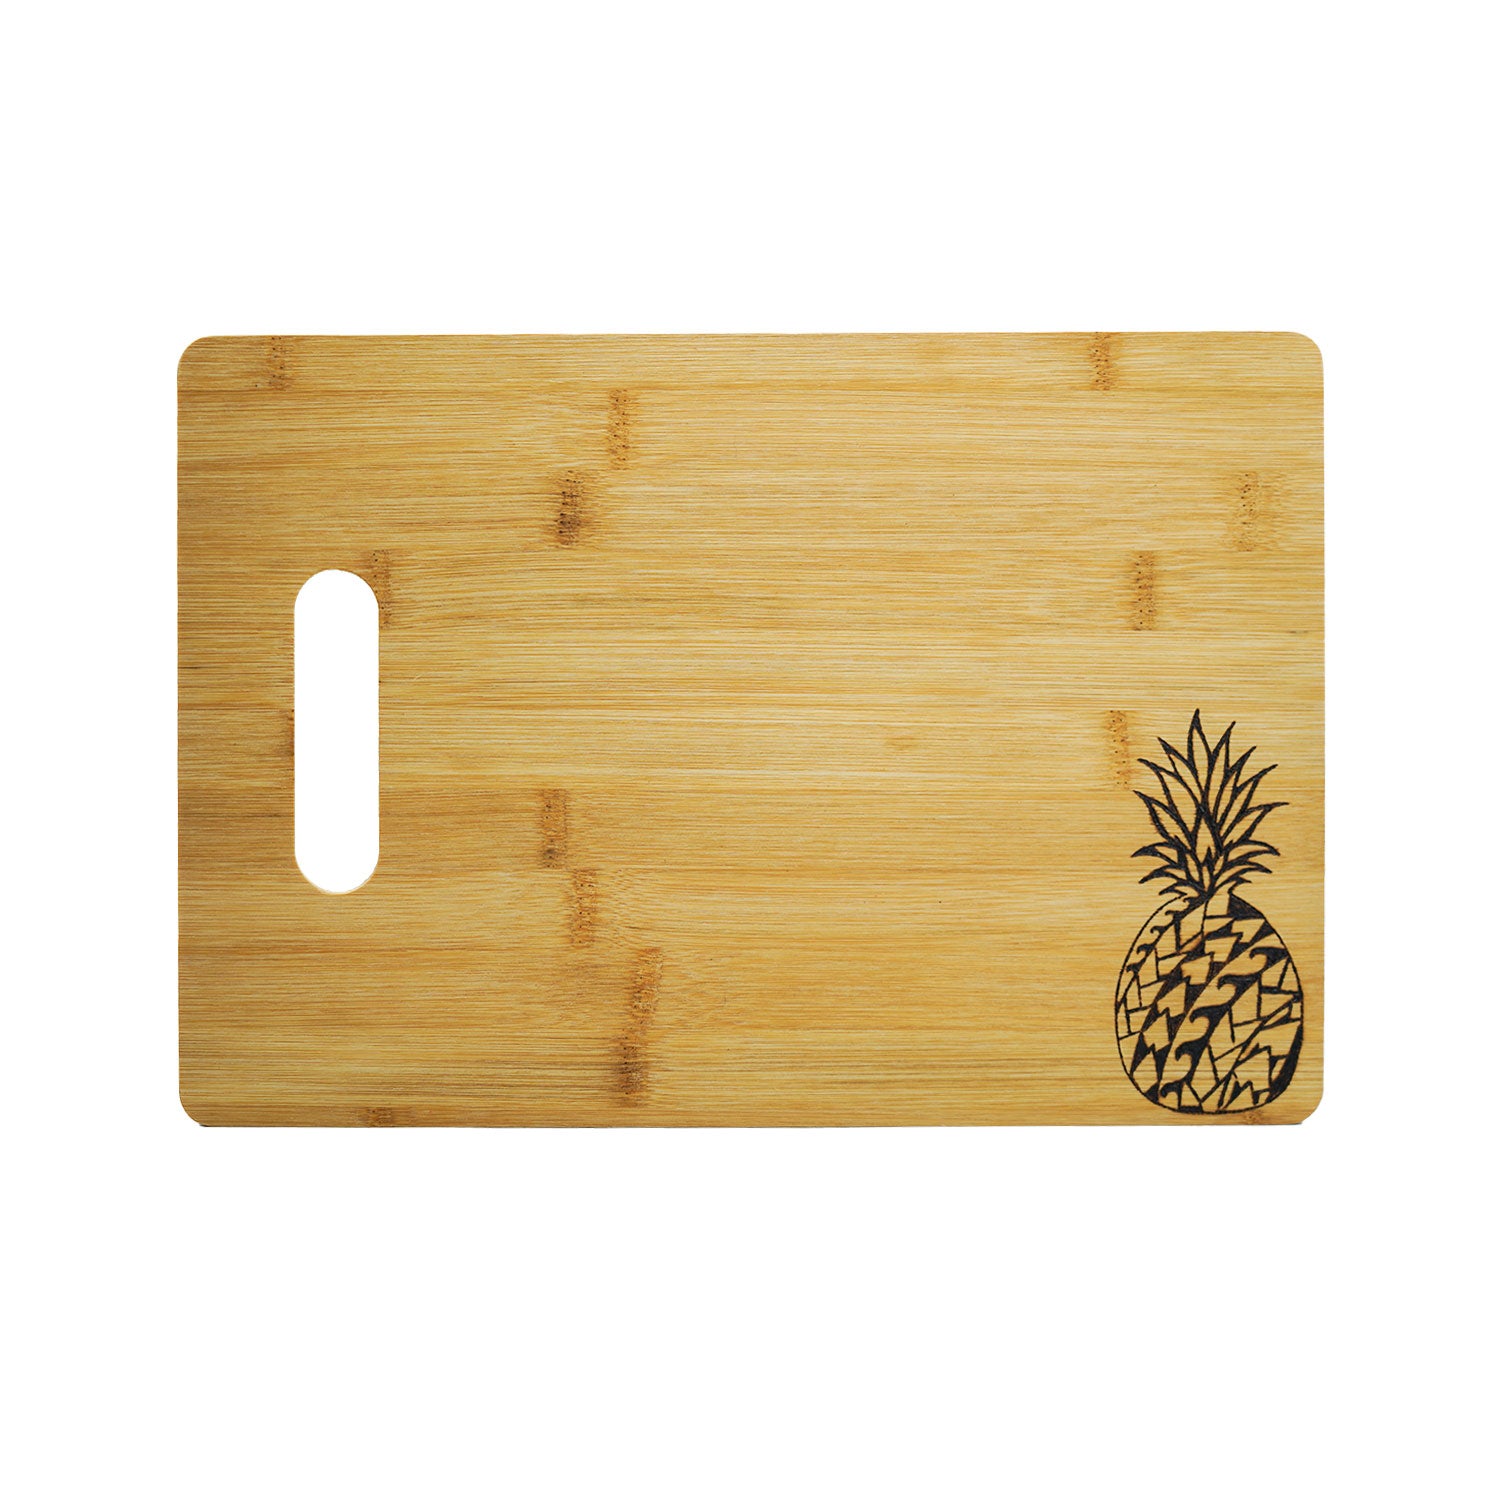 Wood Carved Pineapple Cutting Board Wall Home Decor.